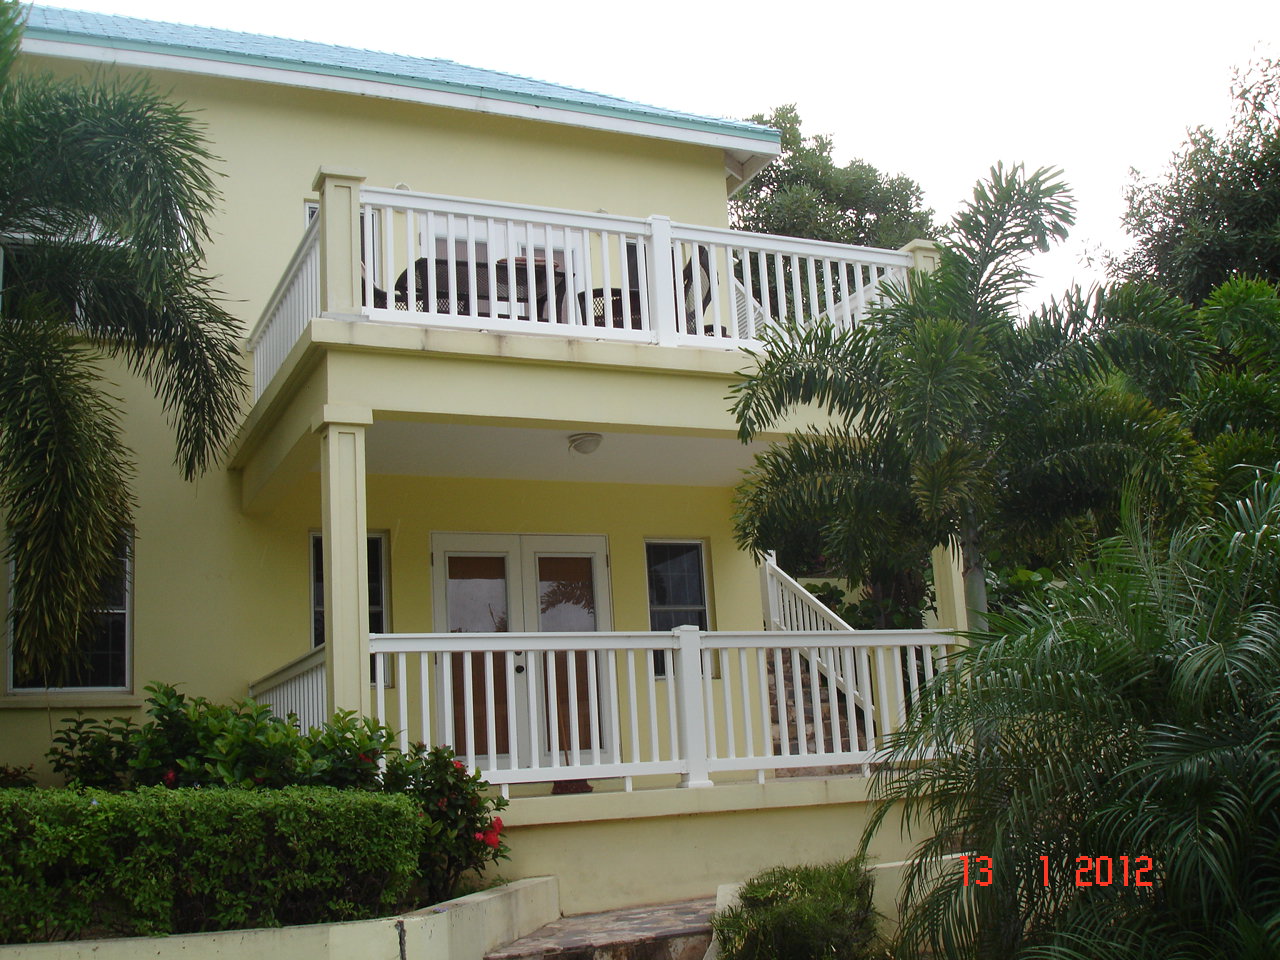 1 Bedroom Villa For Rent With Great View In Calypso Bay